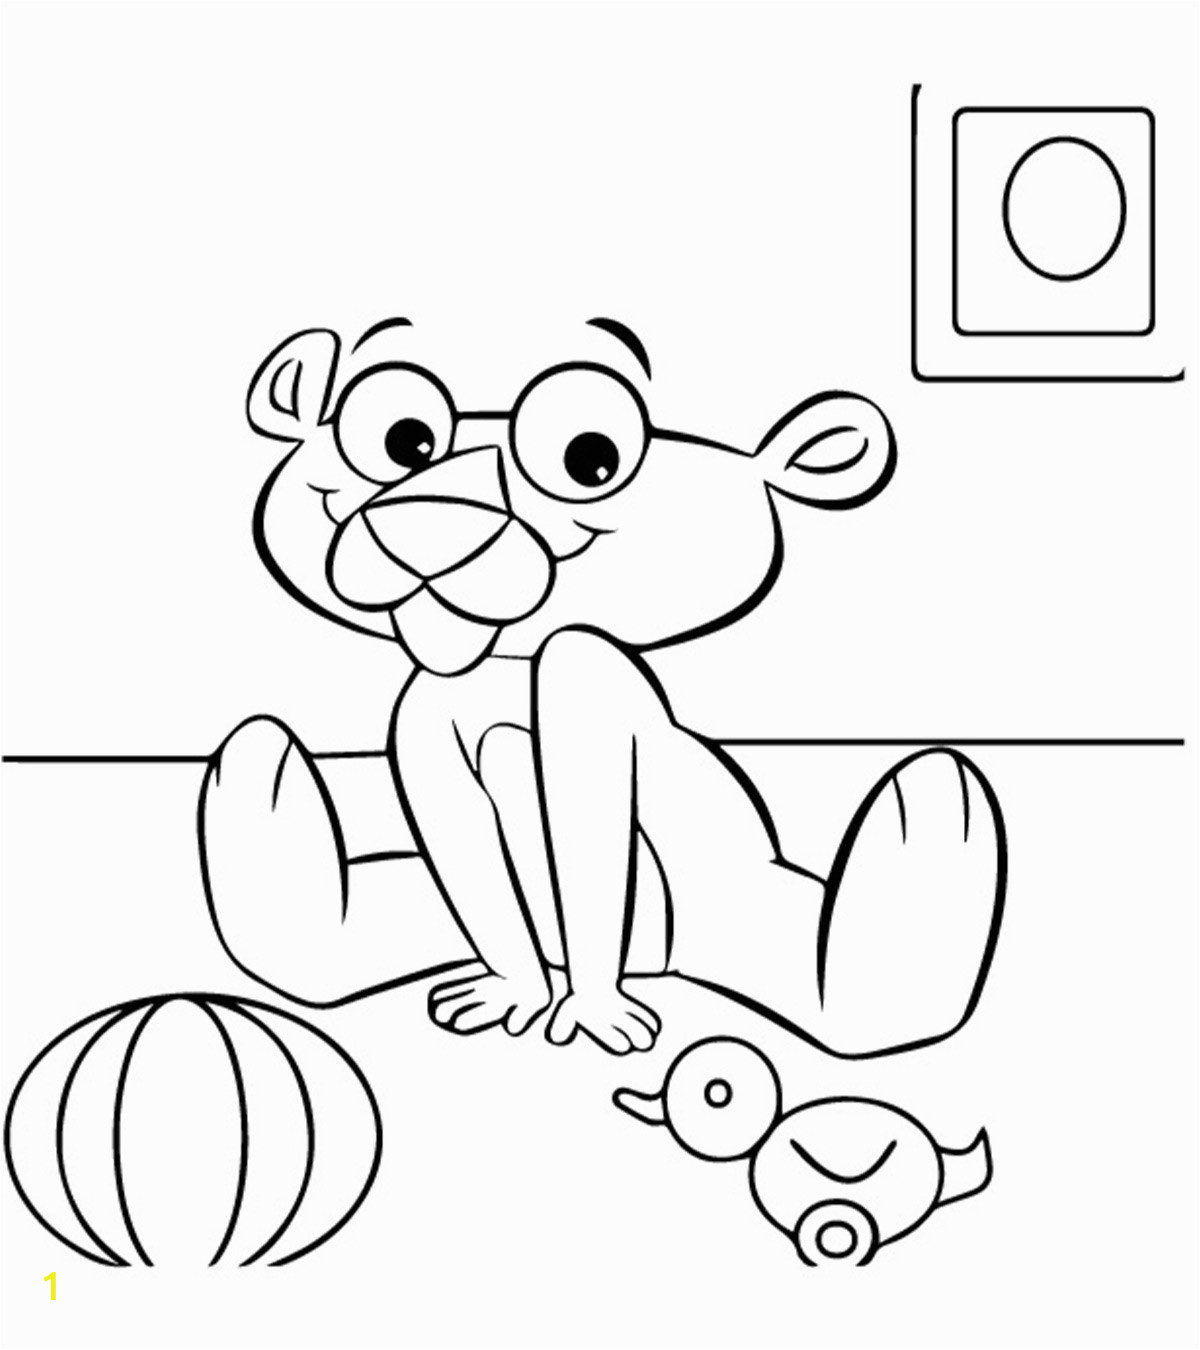 Top 10 Pink Panther Coloring Pages For Your Toddler1